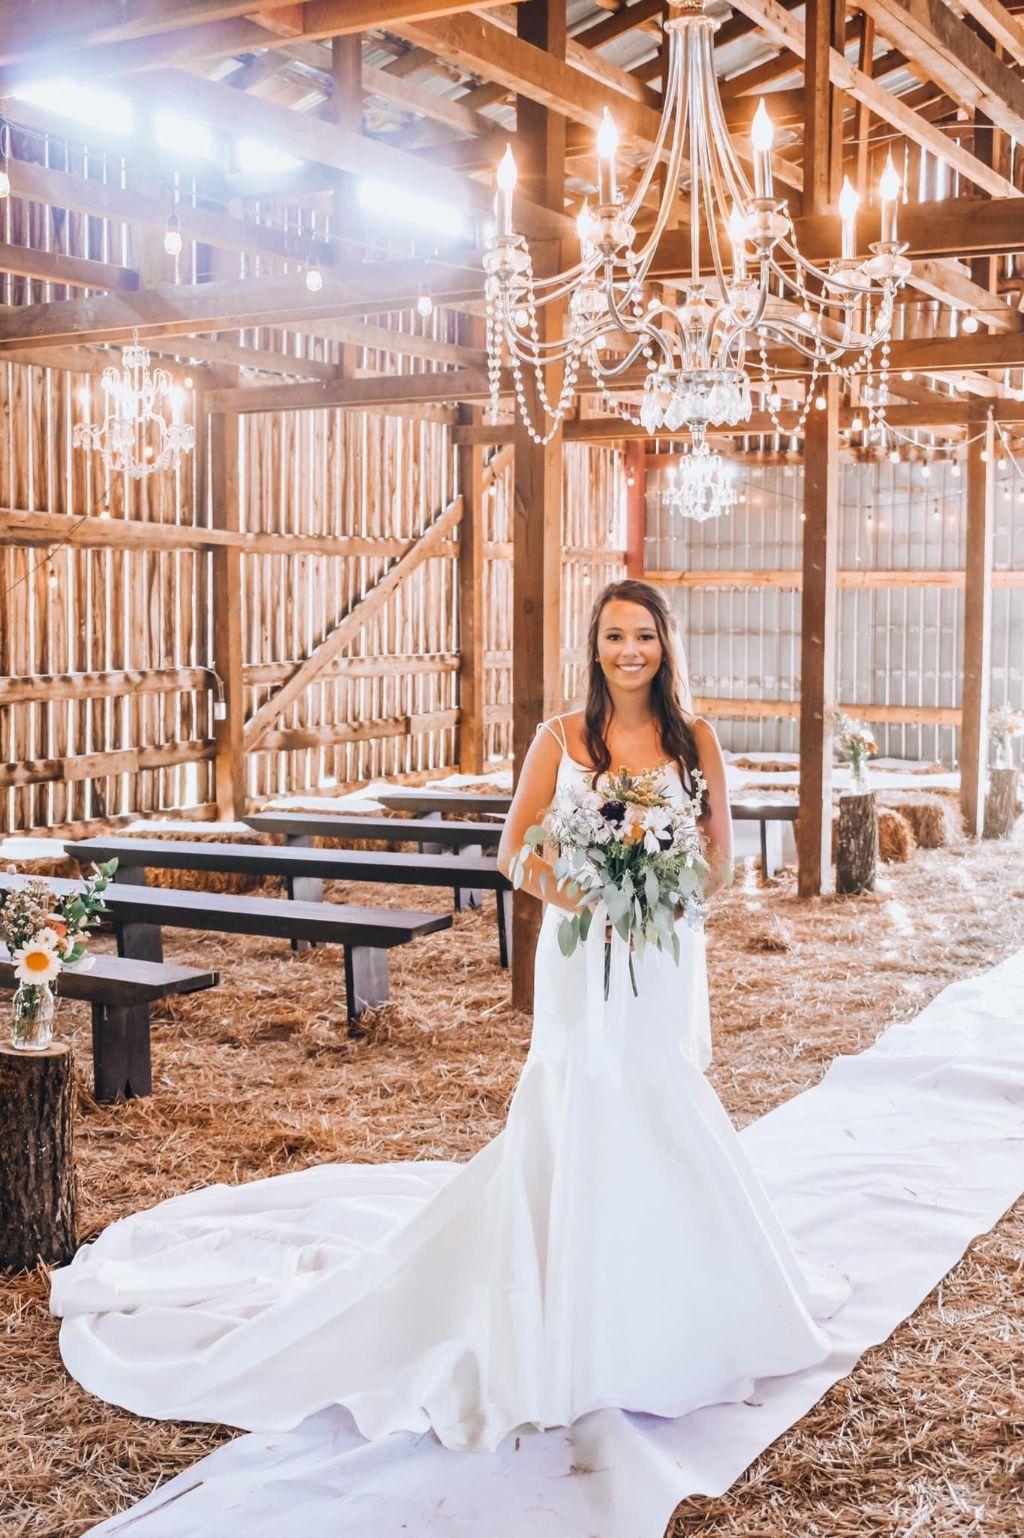 Photo of Bride in the Barn under the main chandelier